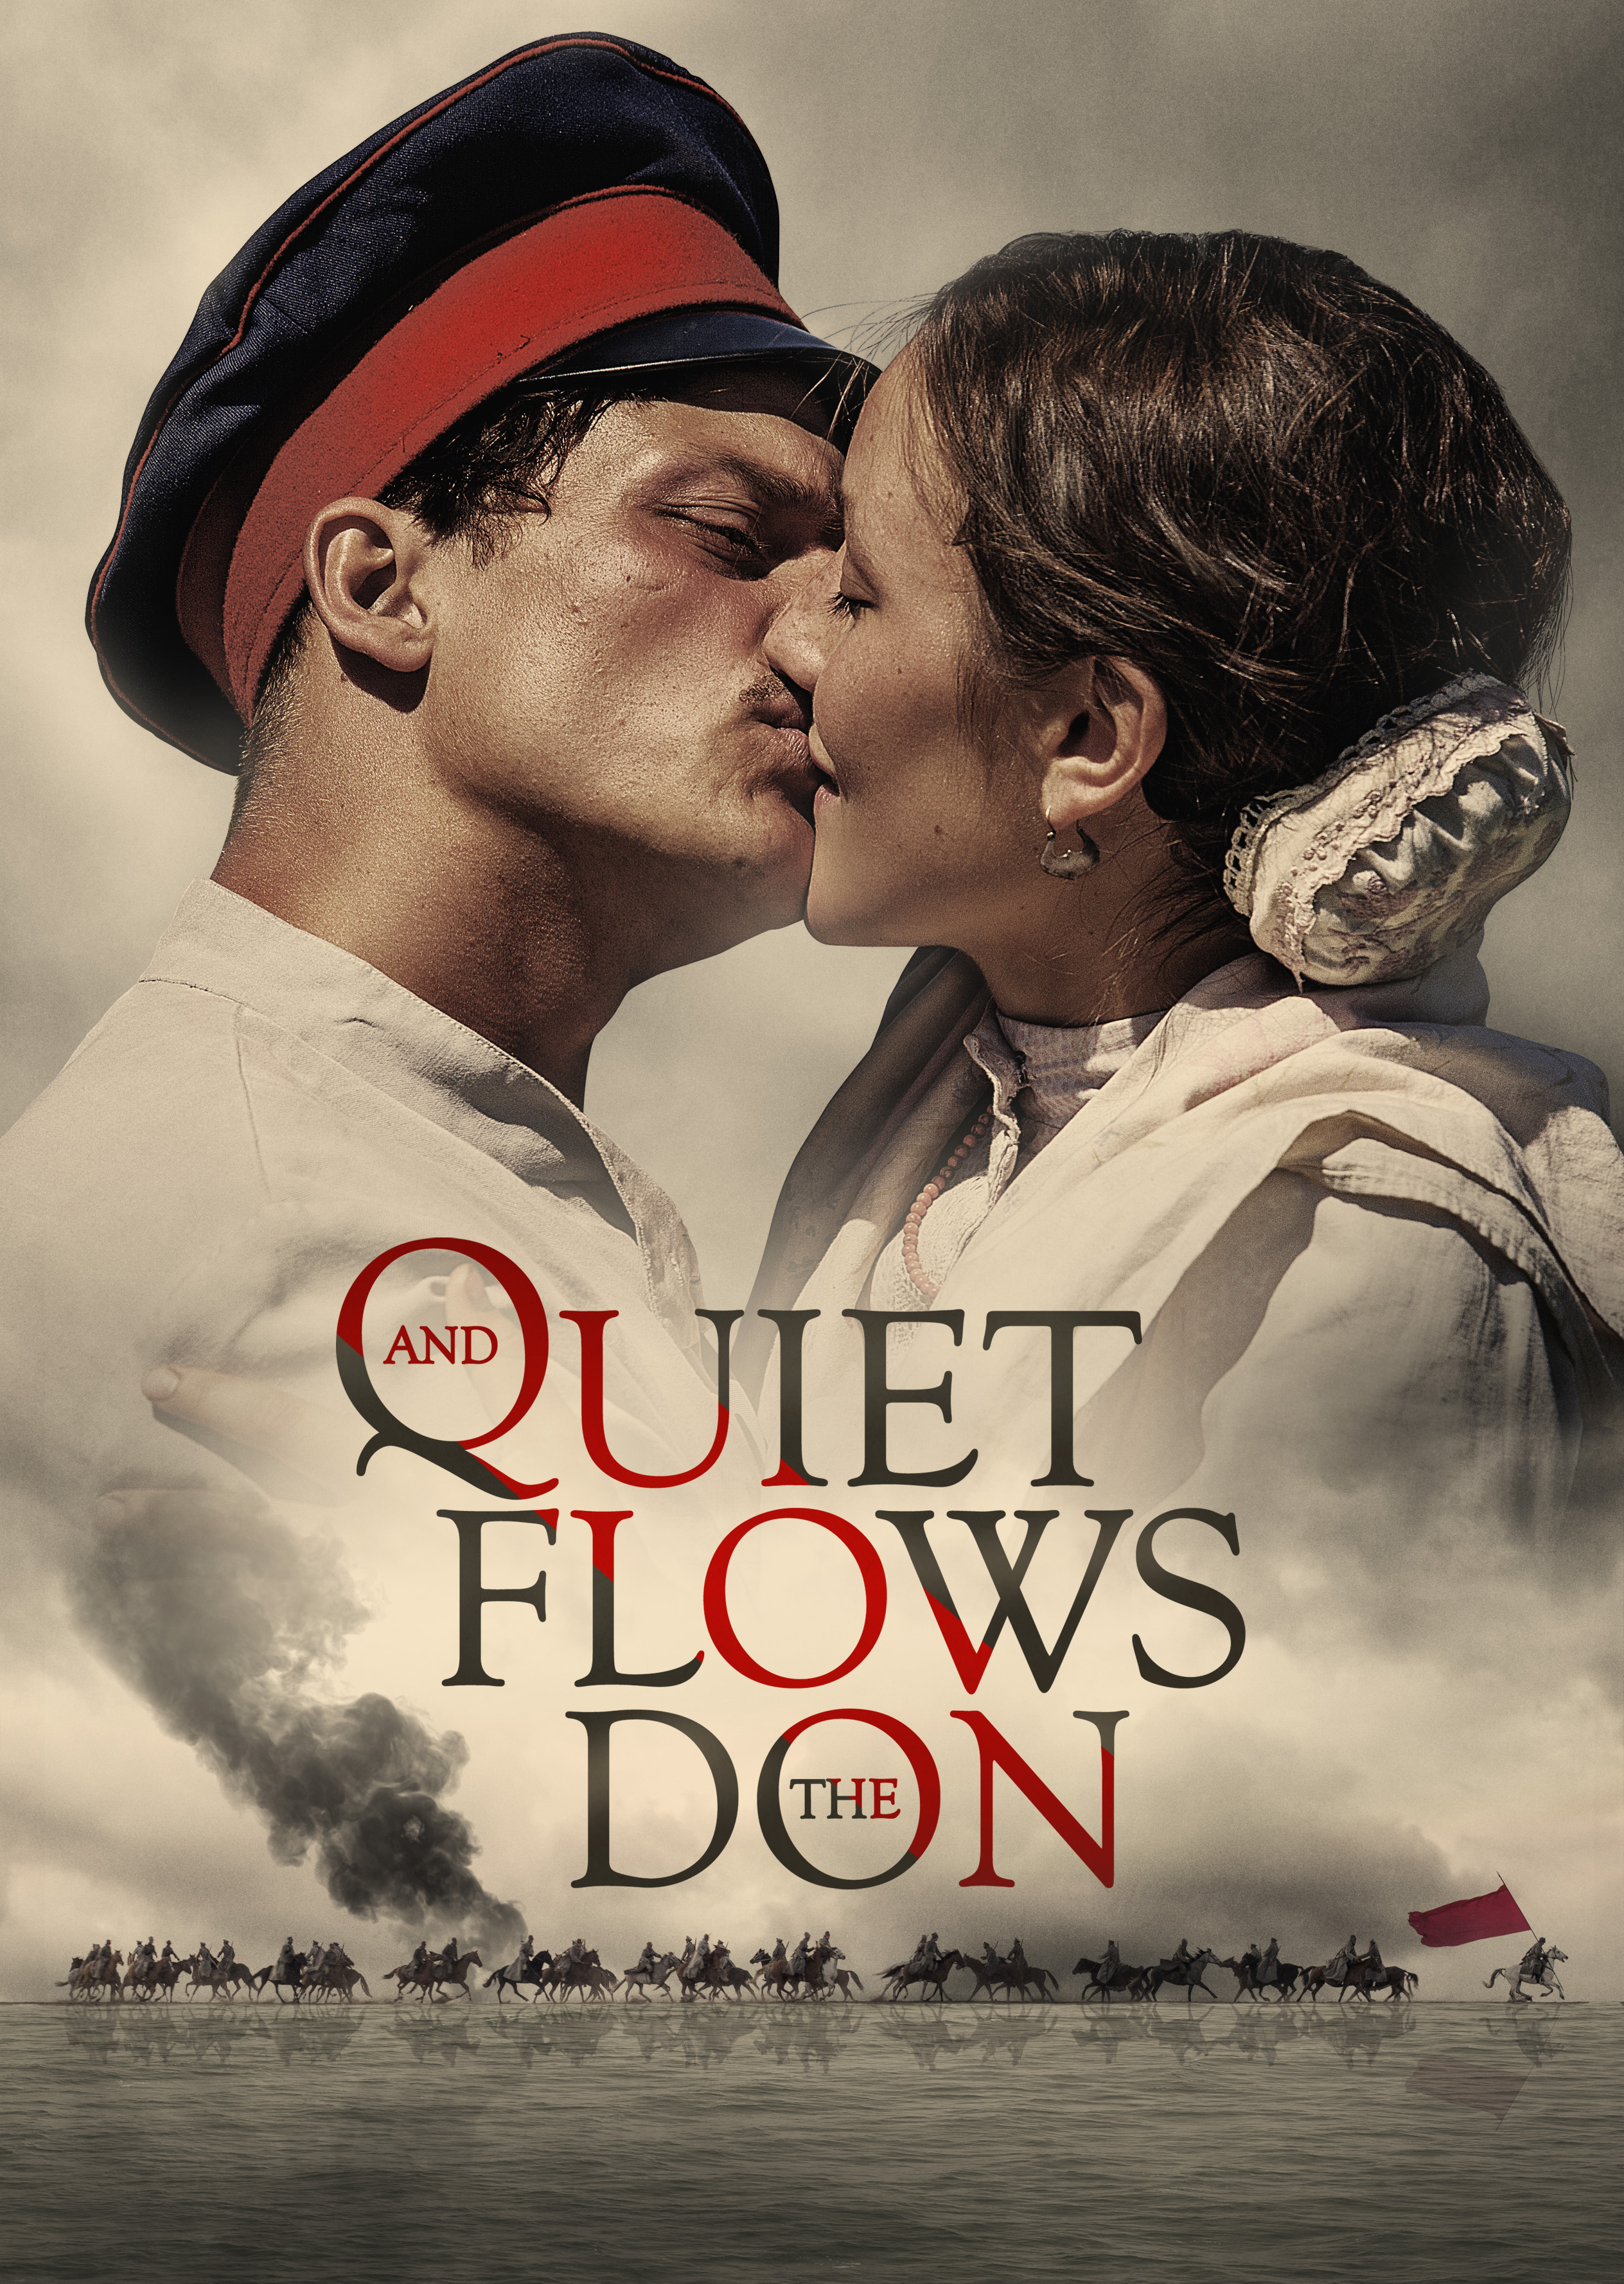 "AND QUIET FLOWS THE DON" IS LICENSED IN SOUTH KOREA